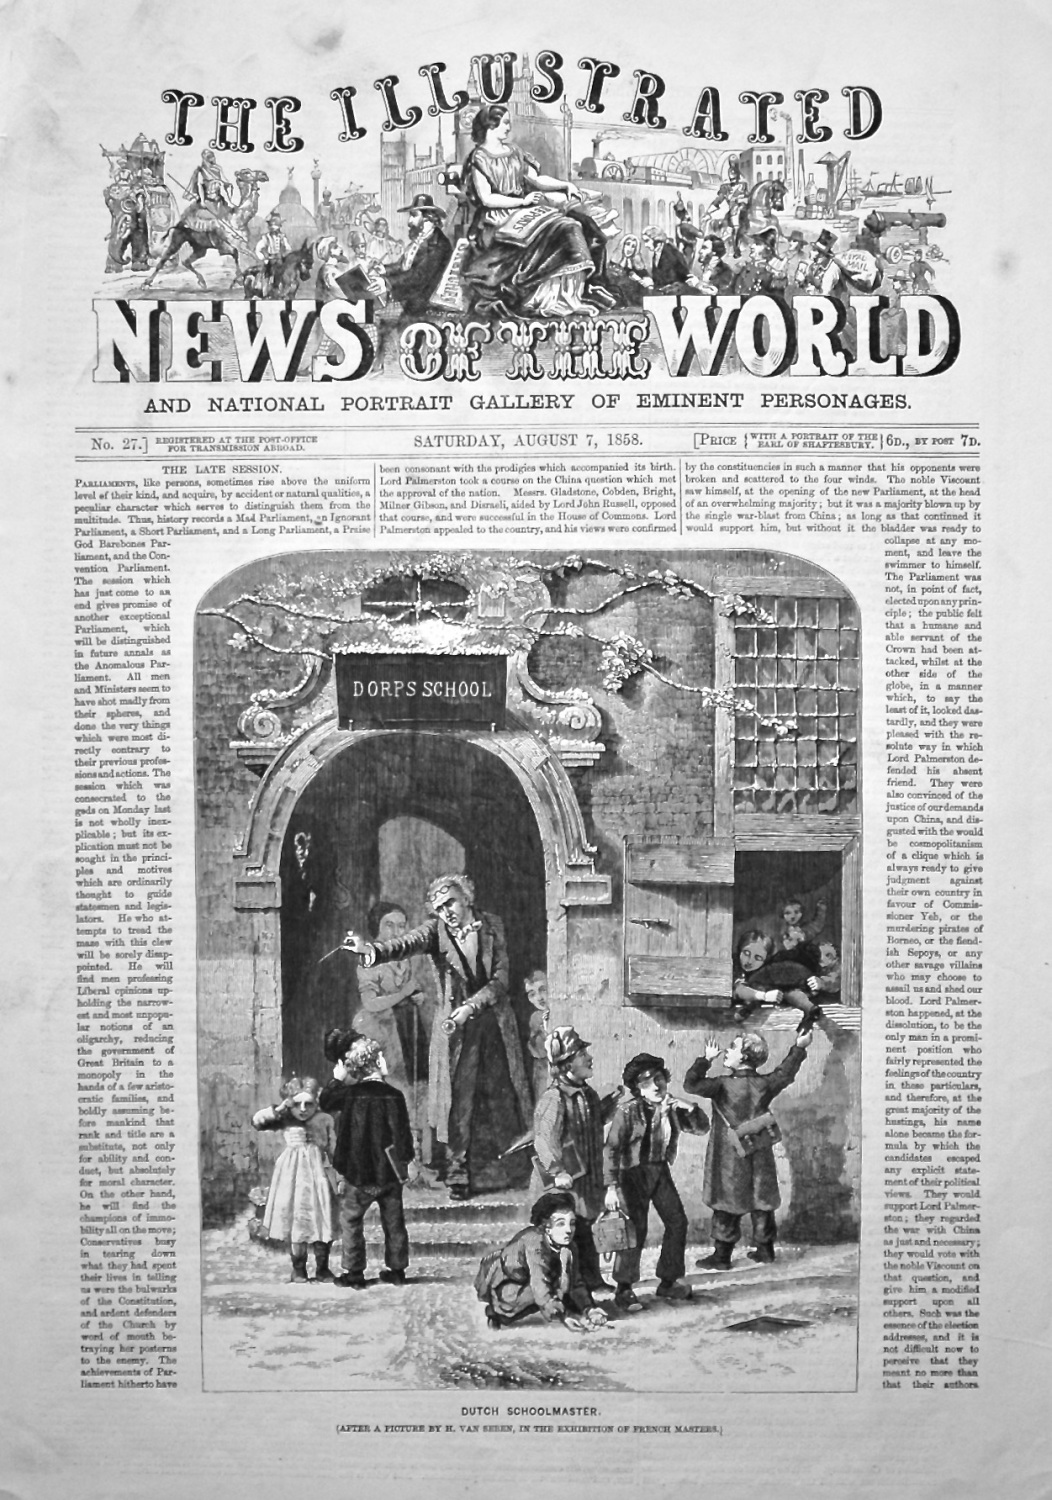 The Illustrated News of the World, August 7th, 1858.